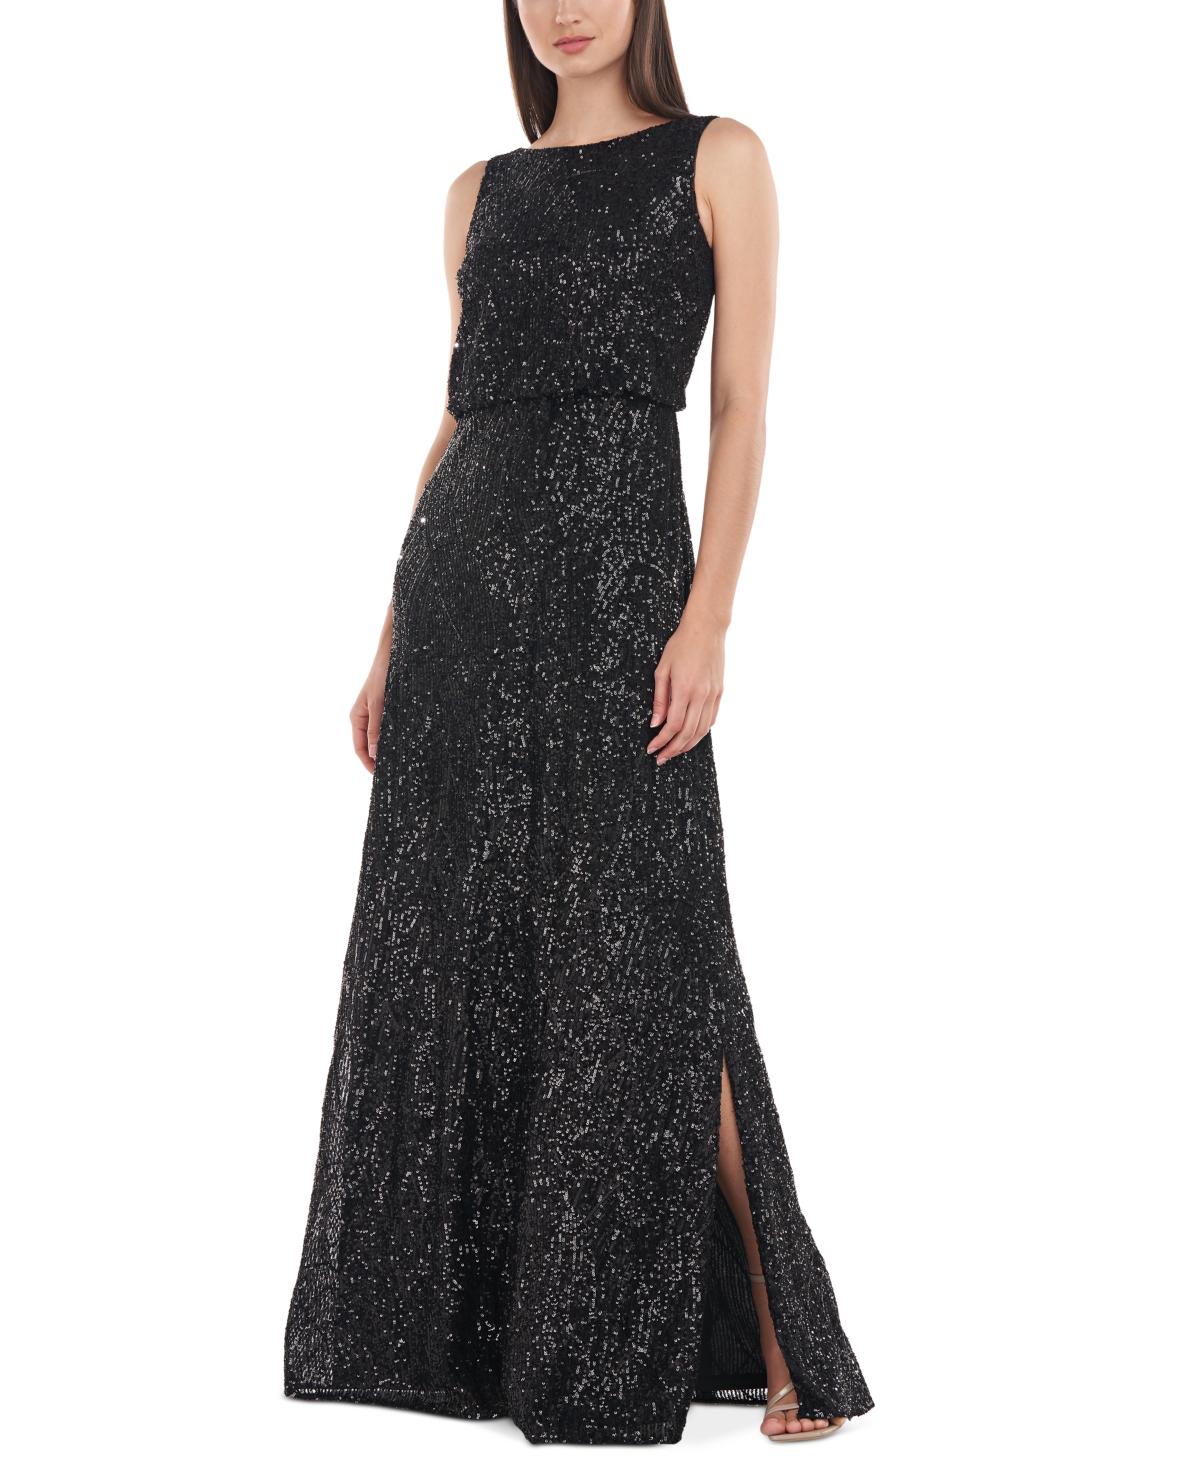 Js Collections Women's Sleeveless Sequined Boat-Neck Gown